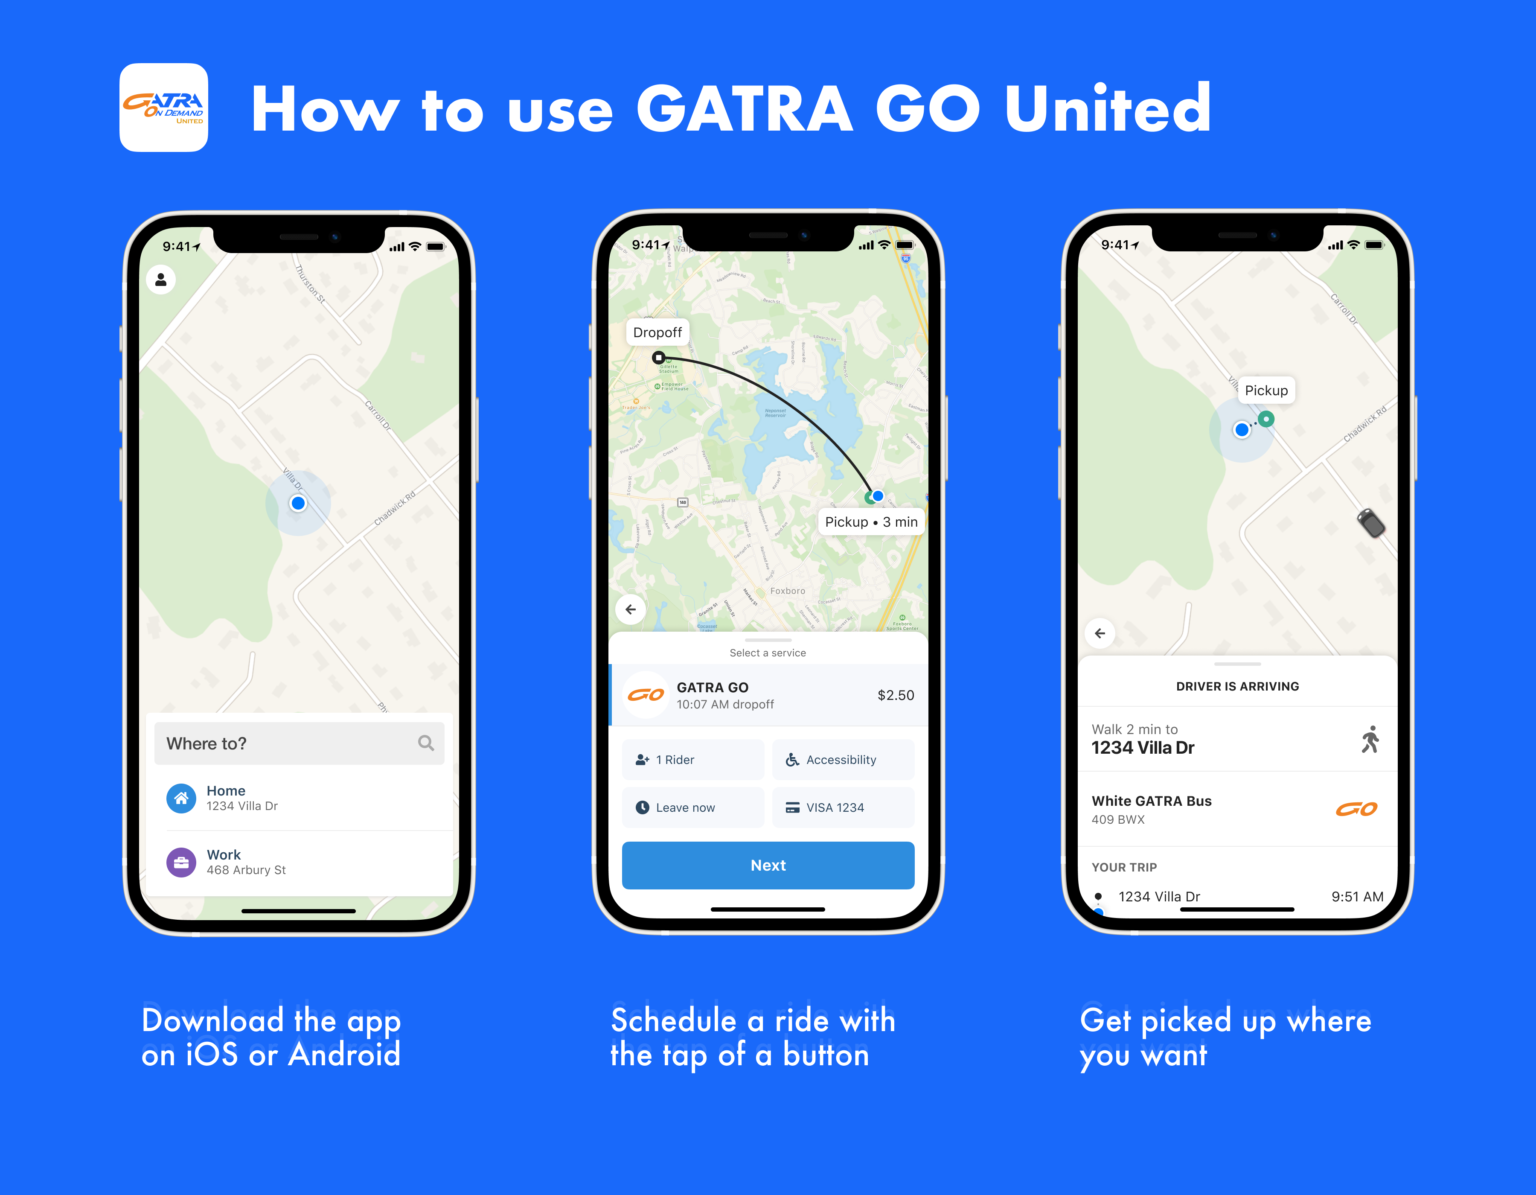 GATRA GO United Is An On-Demand, Same Day, Affordable, And Accessible Public Transit Service Serving Franklin